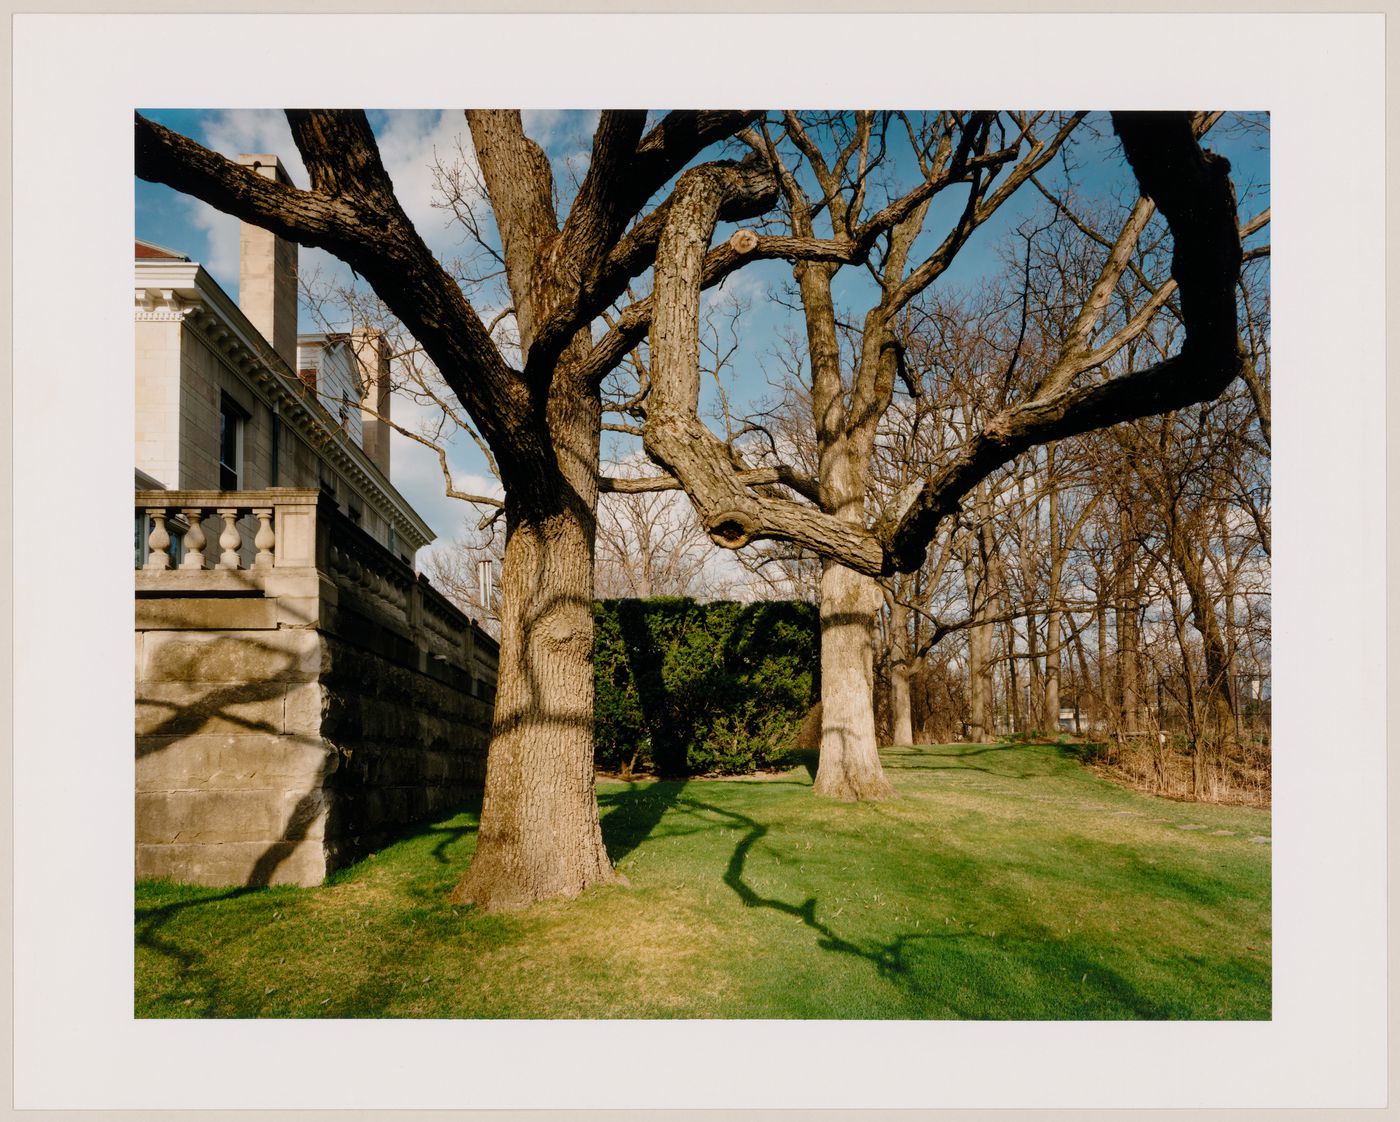 Viewing Olmsted: View at the rear of the house, "Pembroke Lodge", the David B. Jones Estate, 500 Greenbay Road, Lake Forest, Illinois